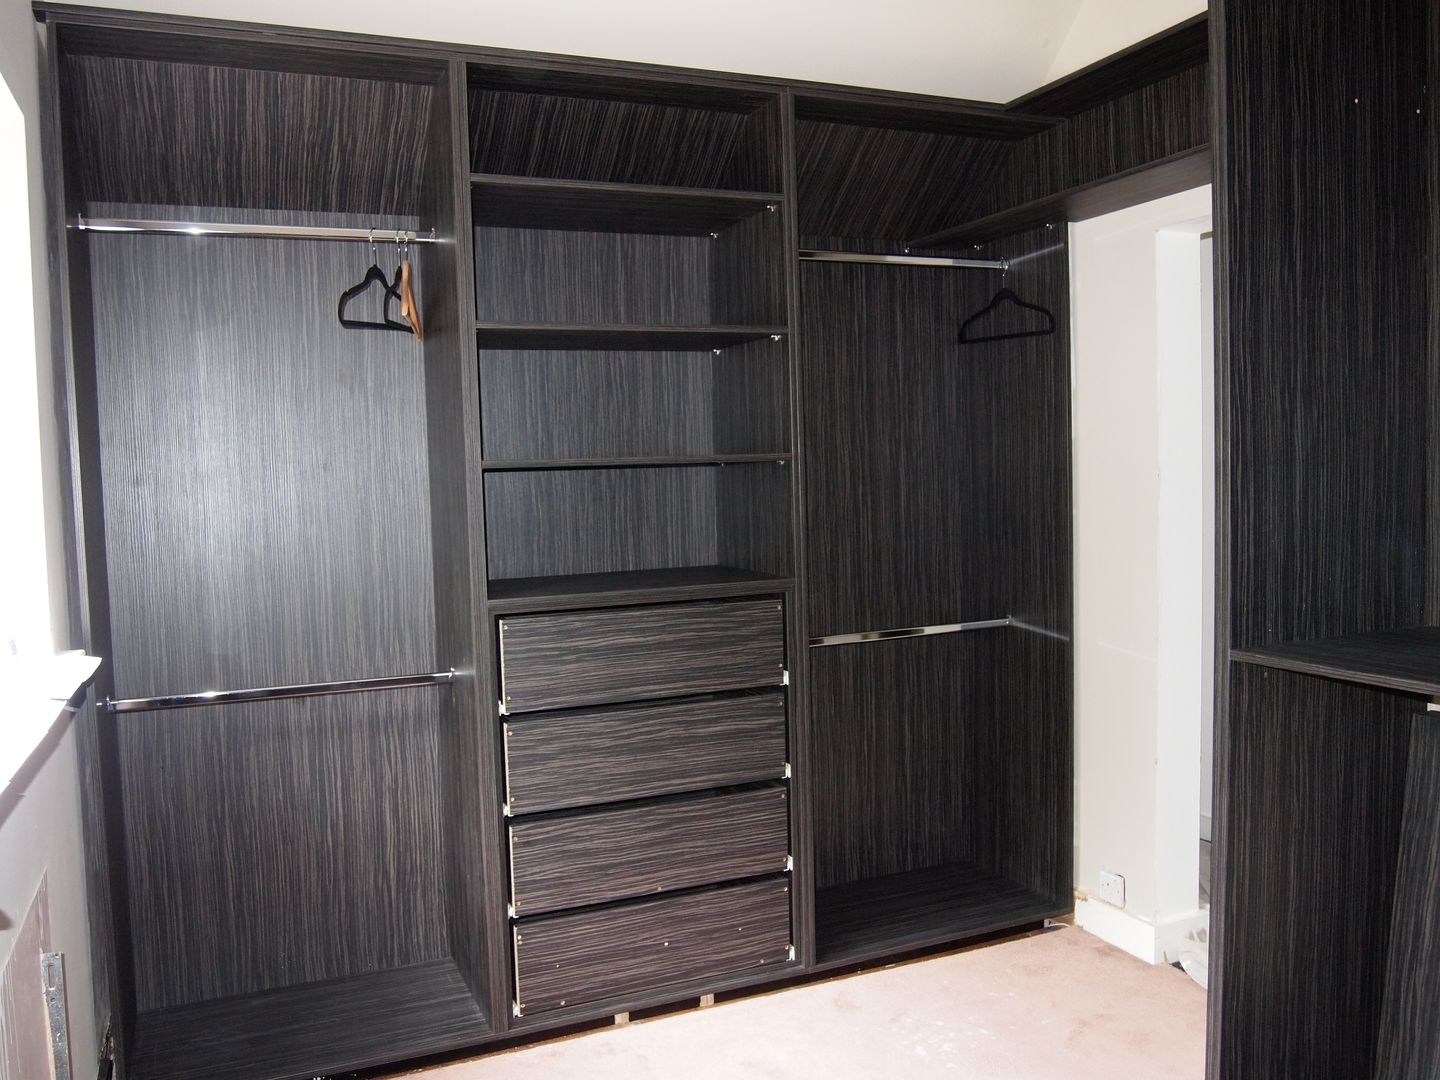 walk in his and her's wardrobes. before and after photos., Designer Vision and Sound: Bespoke Cabinet Making Designer Vision and Sound: Bespoke Cabinet Making Closets de estilo moderno